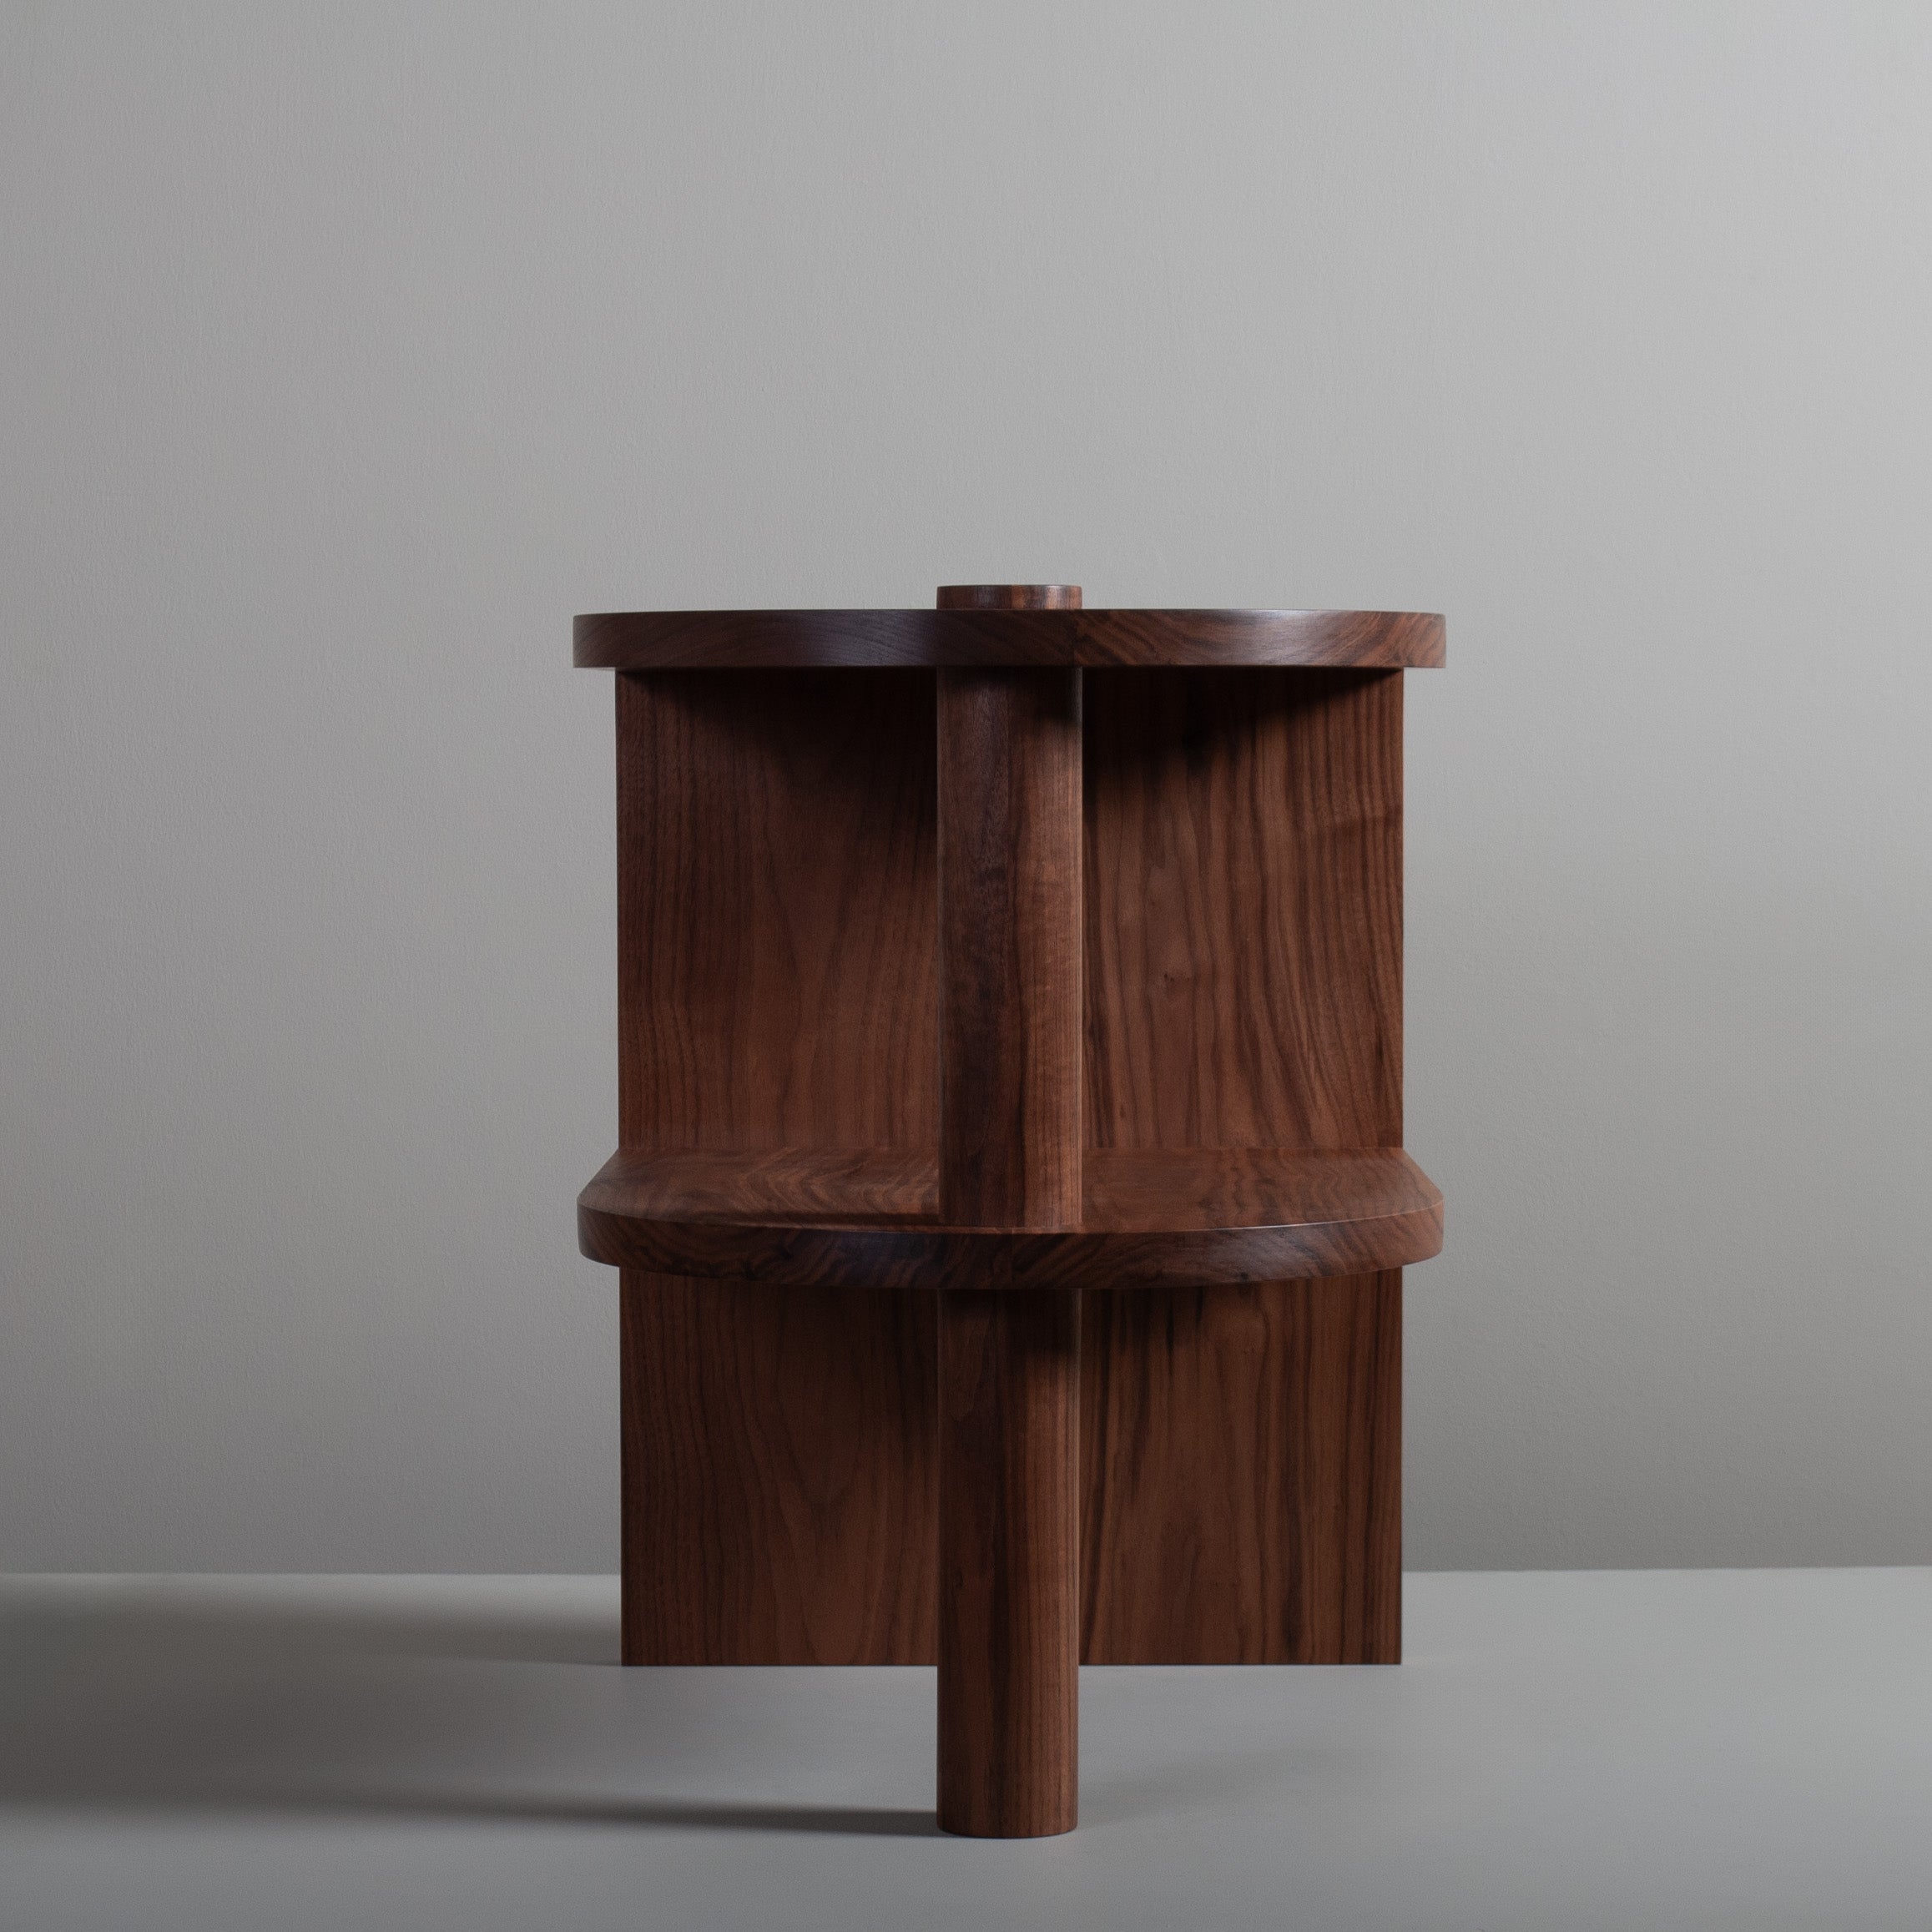 Architectural Handcrafted Walnut End Table